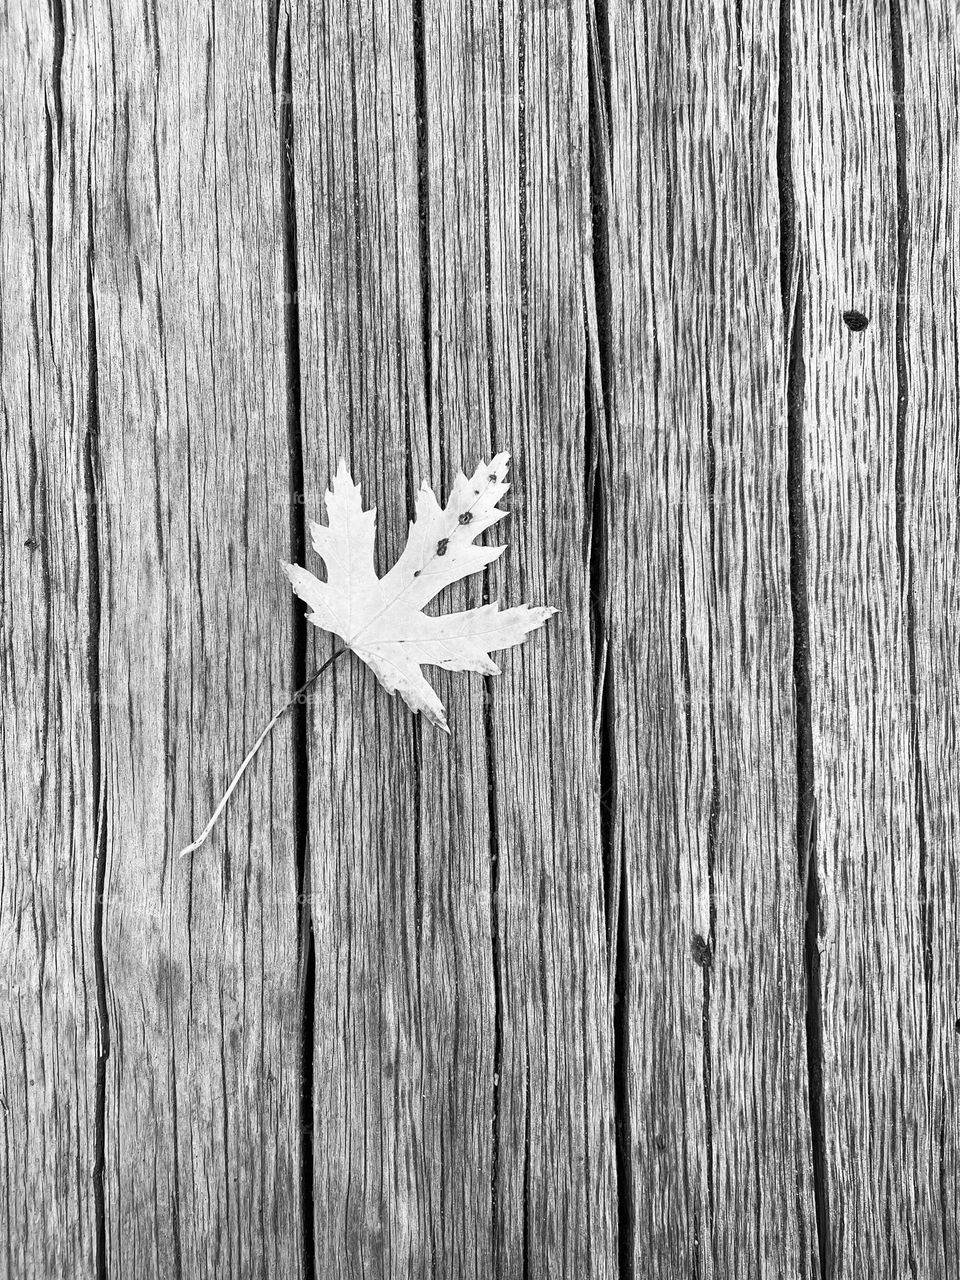 Small leaf on the wooden background 